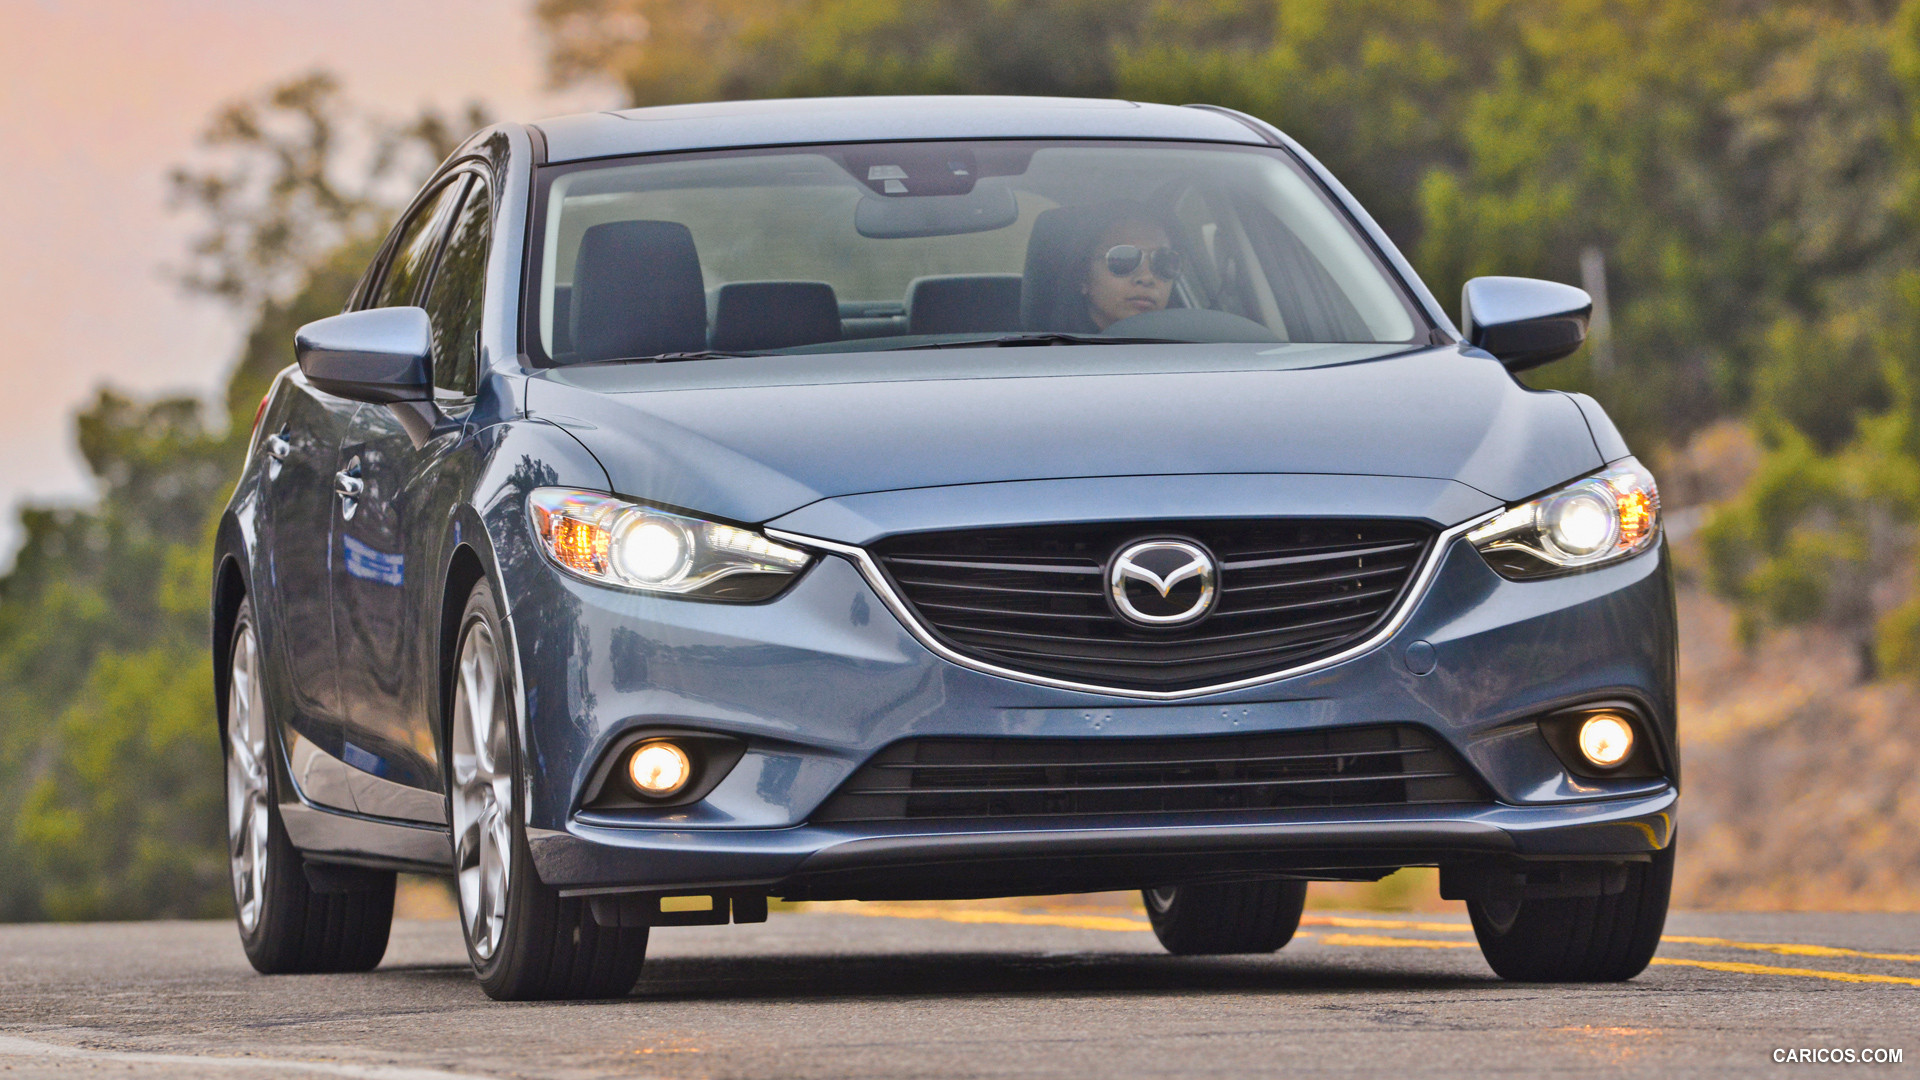 2014 Mazda6 GT - Front, #117 of 179